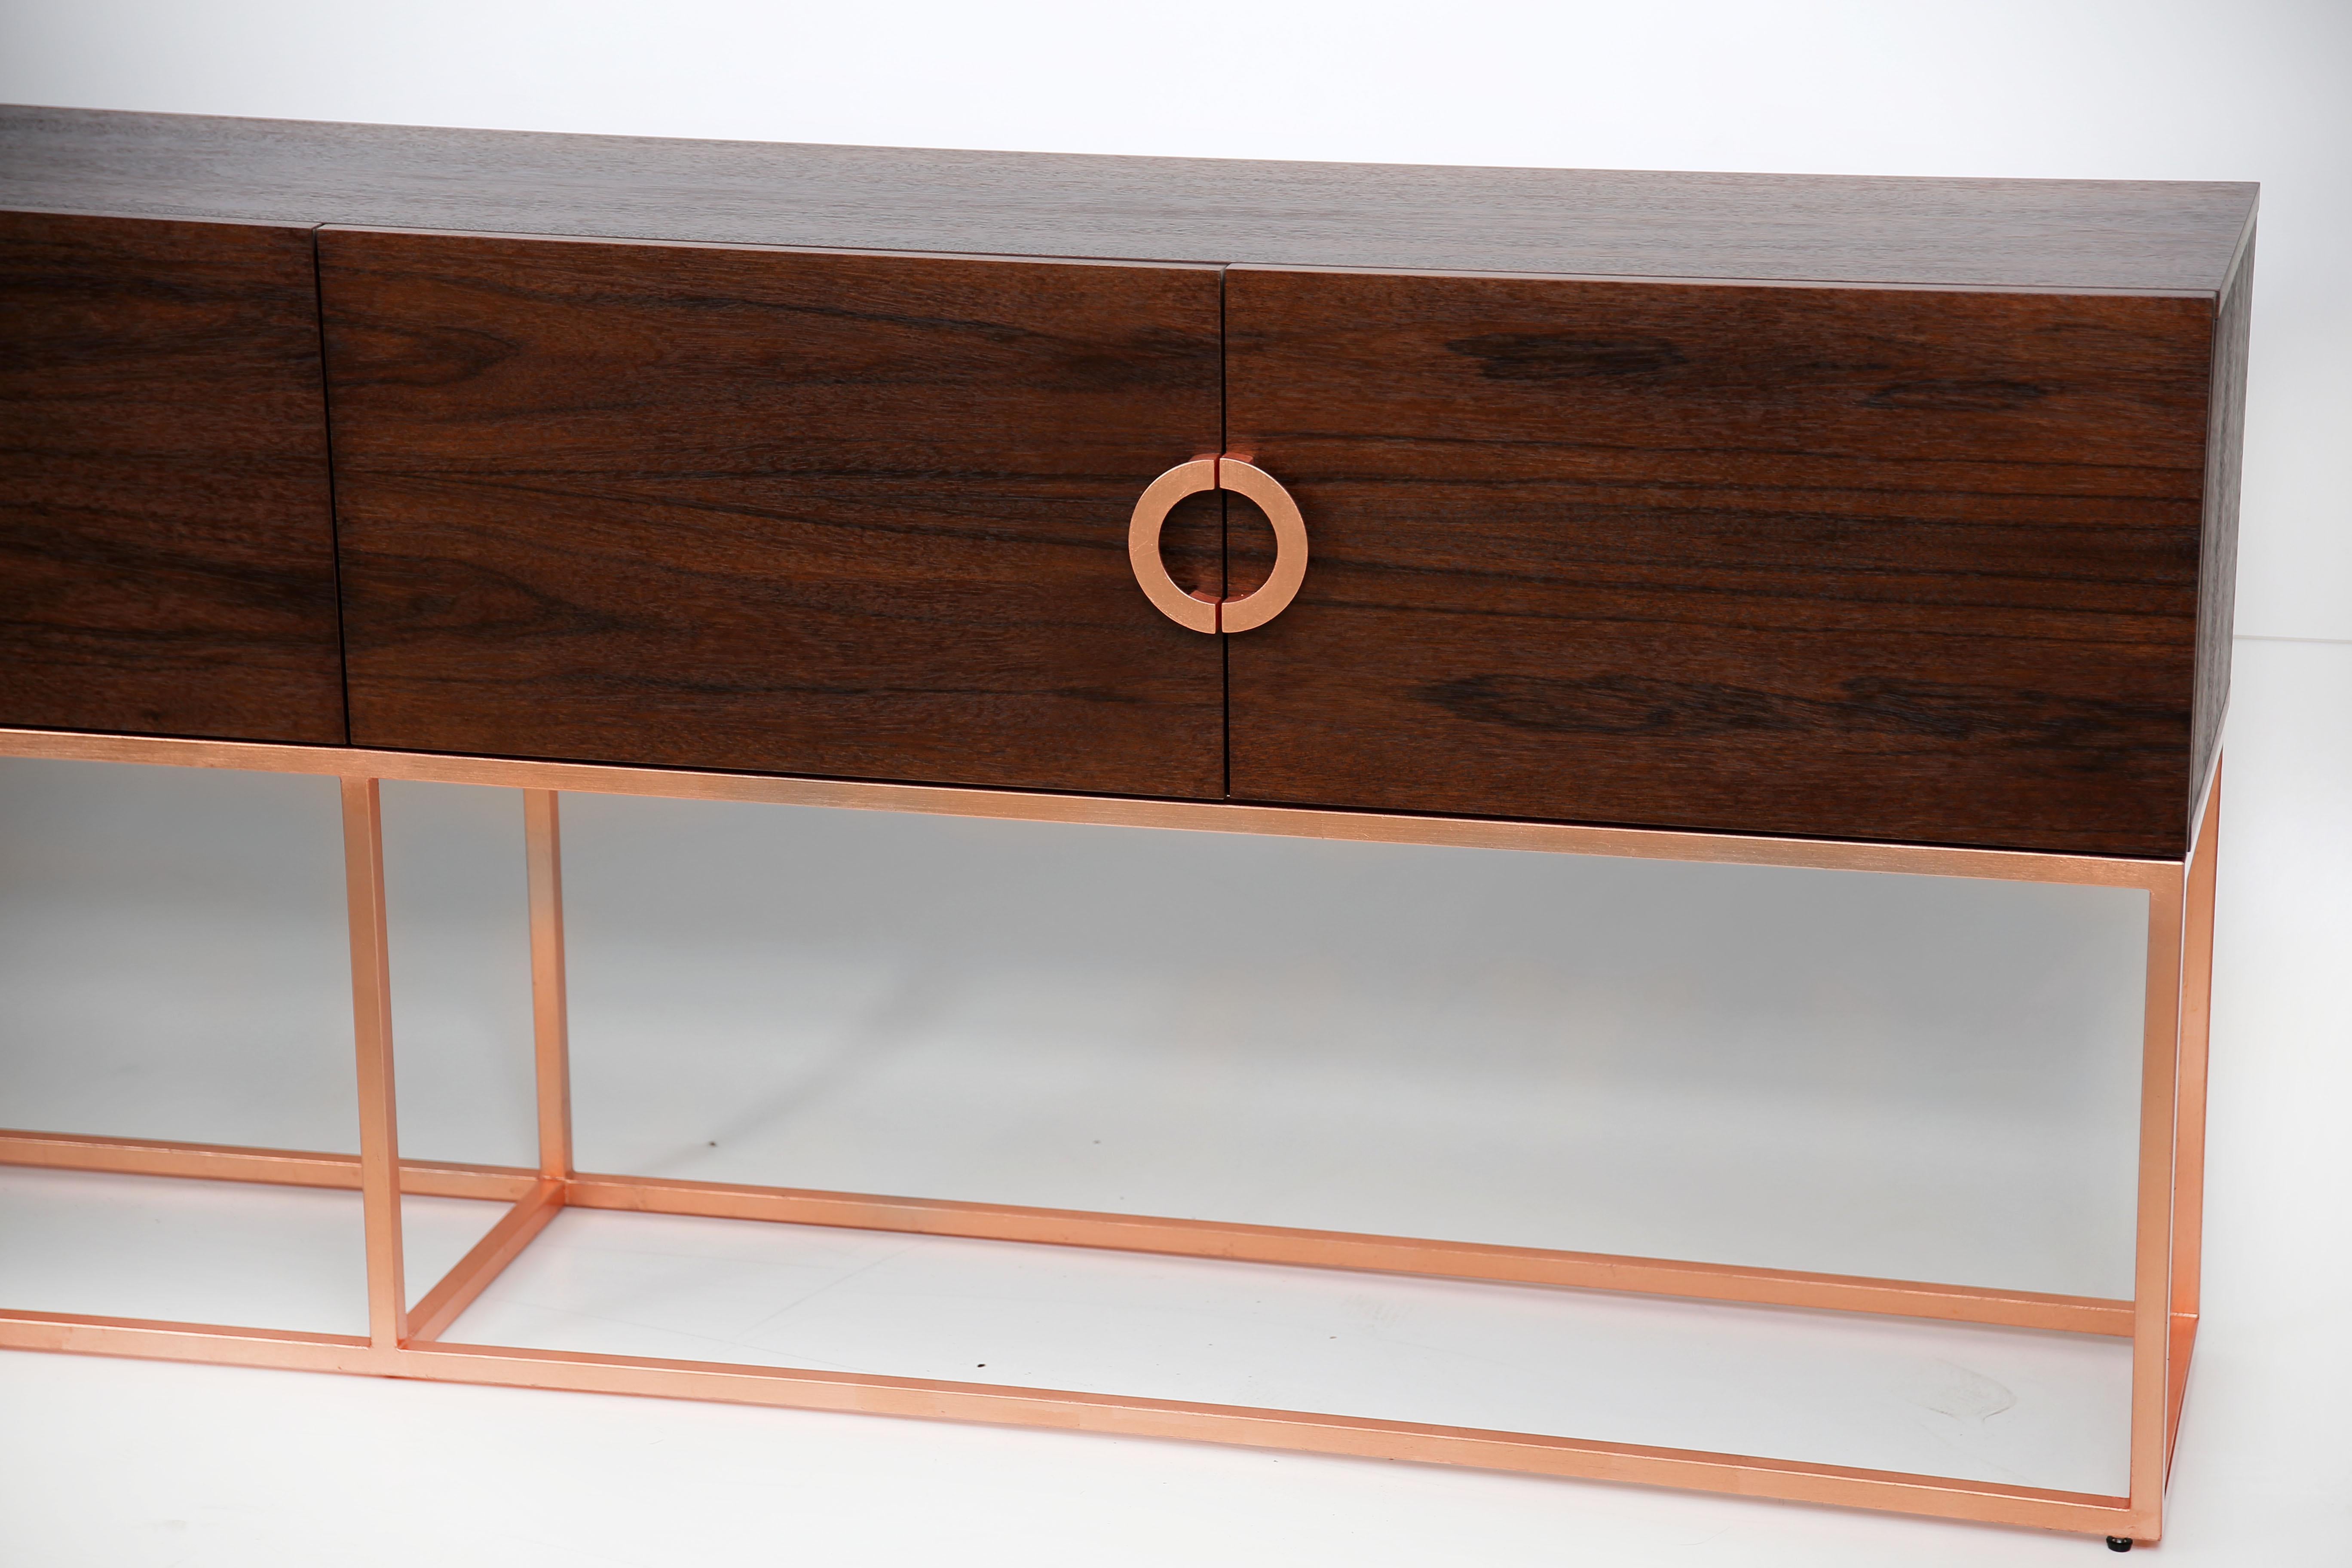 Norse TV stand presents your everyday space with ample storage. Constructed of engineered wood and finest American walnut veneers. The TV stand features four doors for your gaming consoles, video players and DVD collections. Copper leaf handles